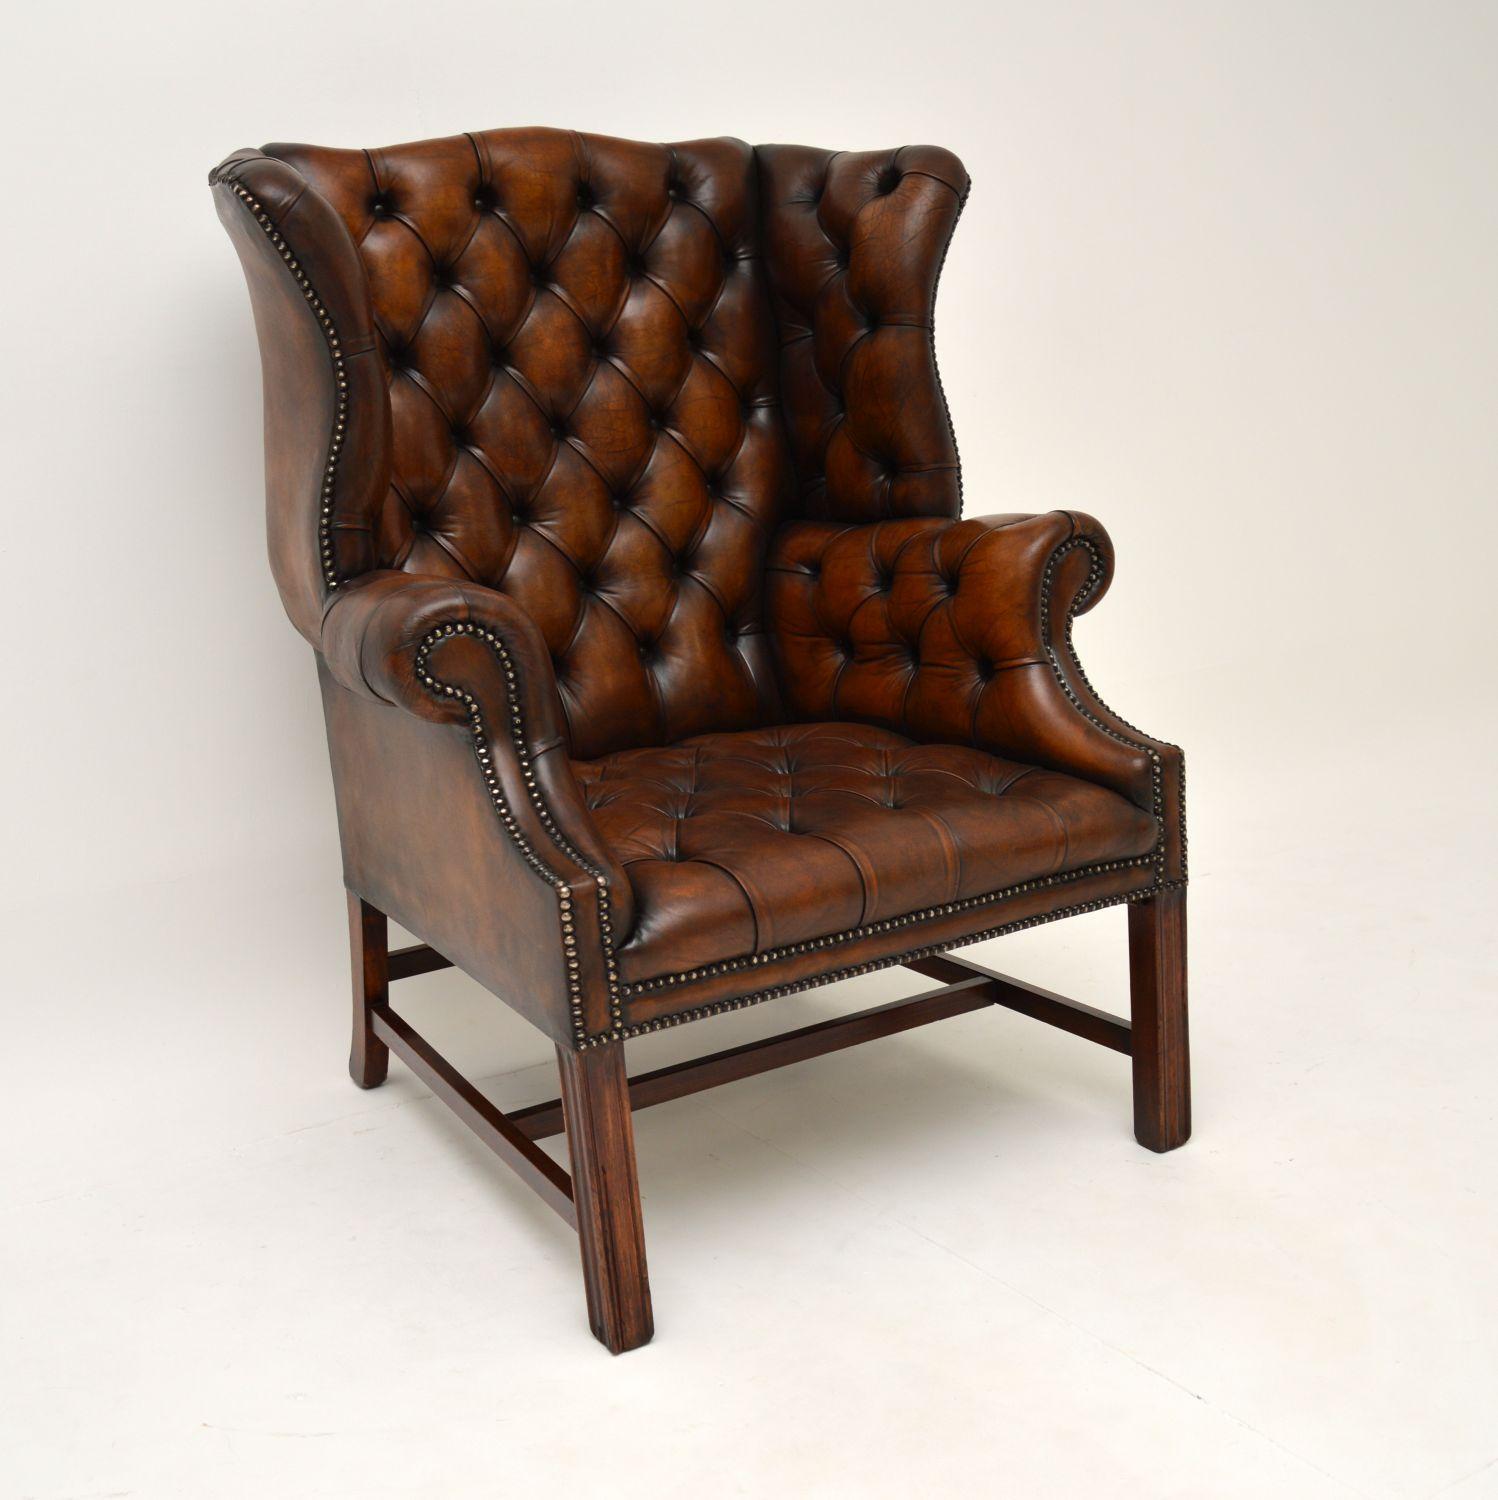 A fantastic antique deep buttoned leather wing back armchair in the Chippendale style & dating from around the 1920-30’s period.
The quality is amazing, this is very well made, sturdy and is of generous proportions. It’s also very comfortable as